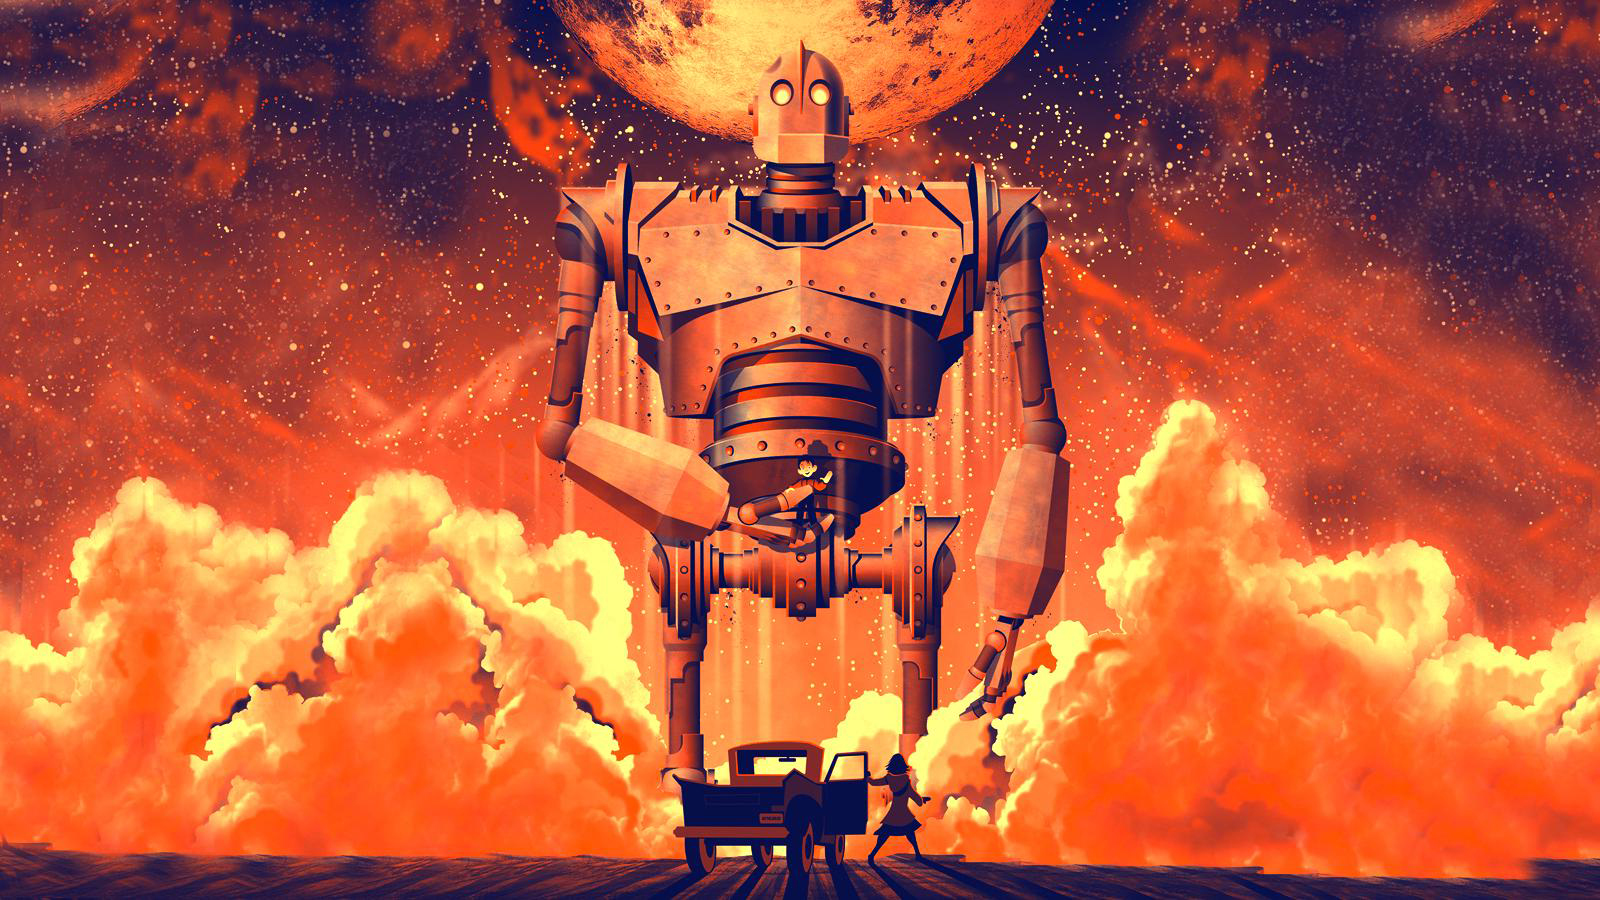 The Iron Giant Backgrounds, Compatible - PC, Mobile, Gadgets| 1600x900 px